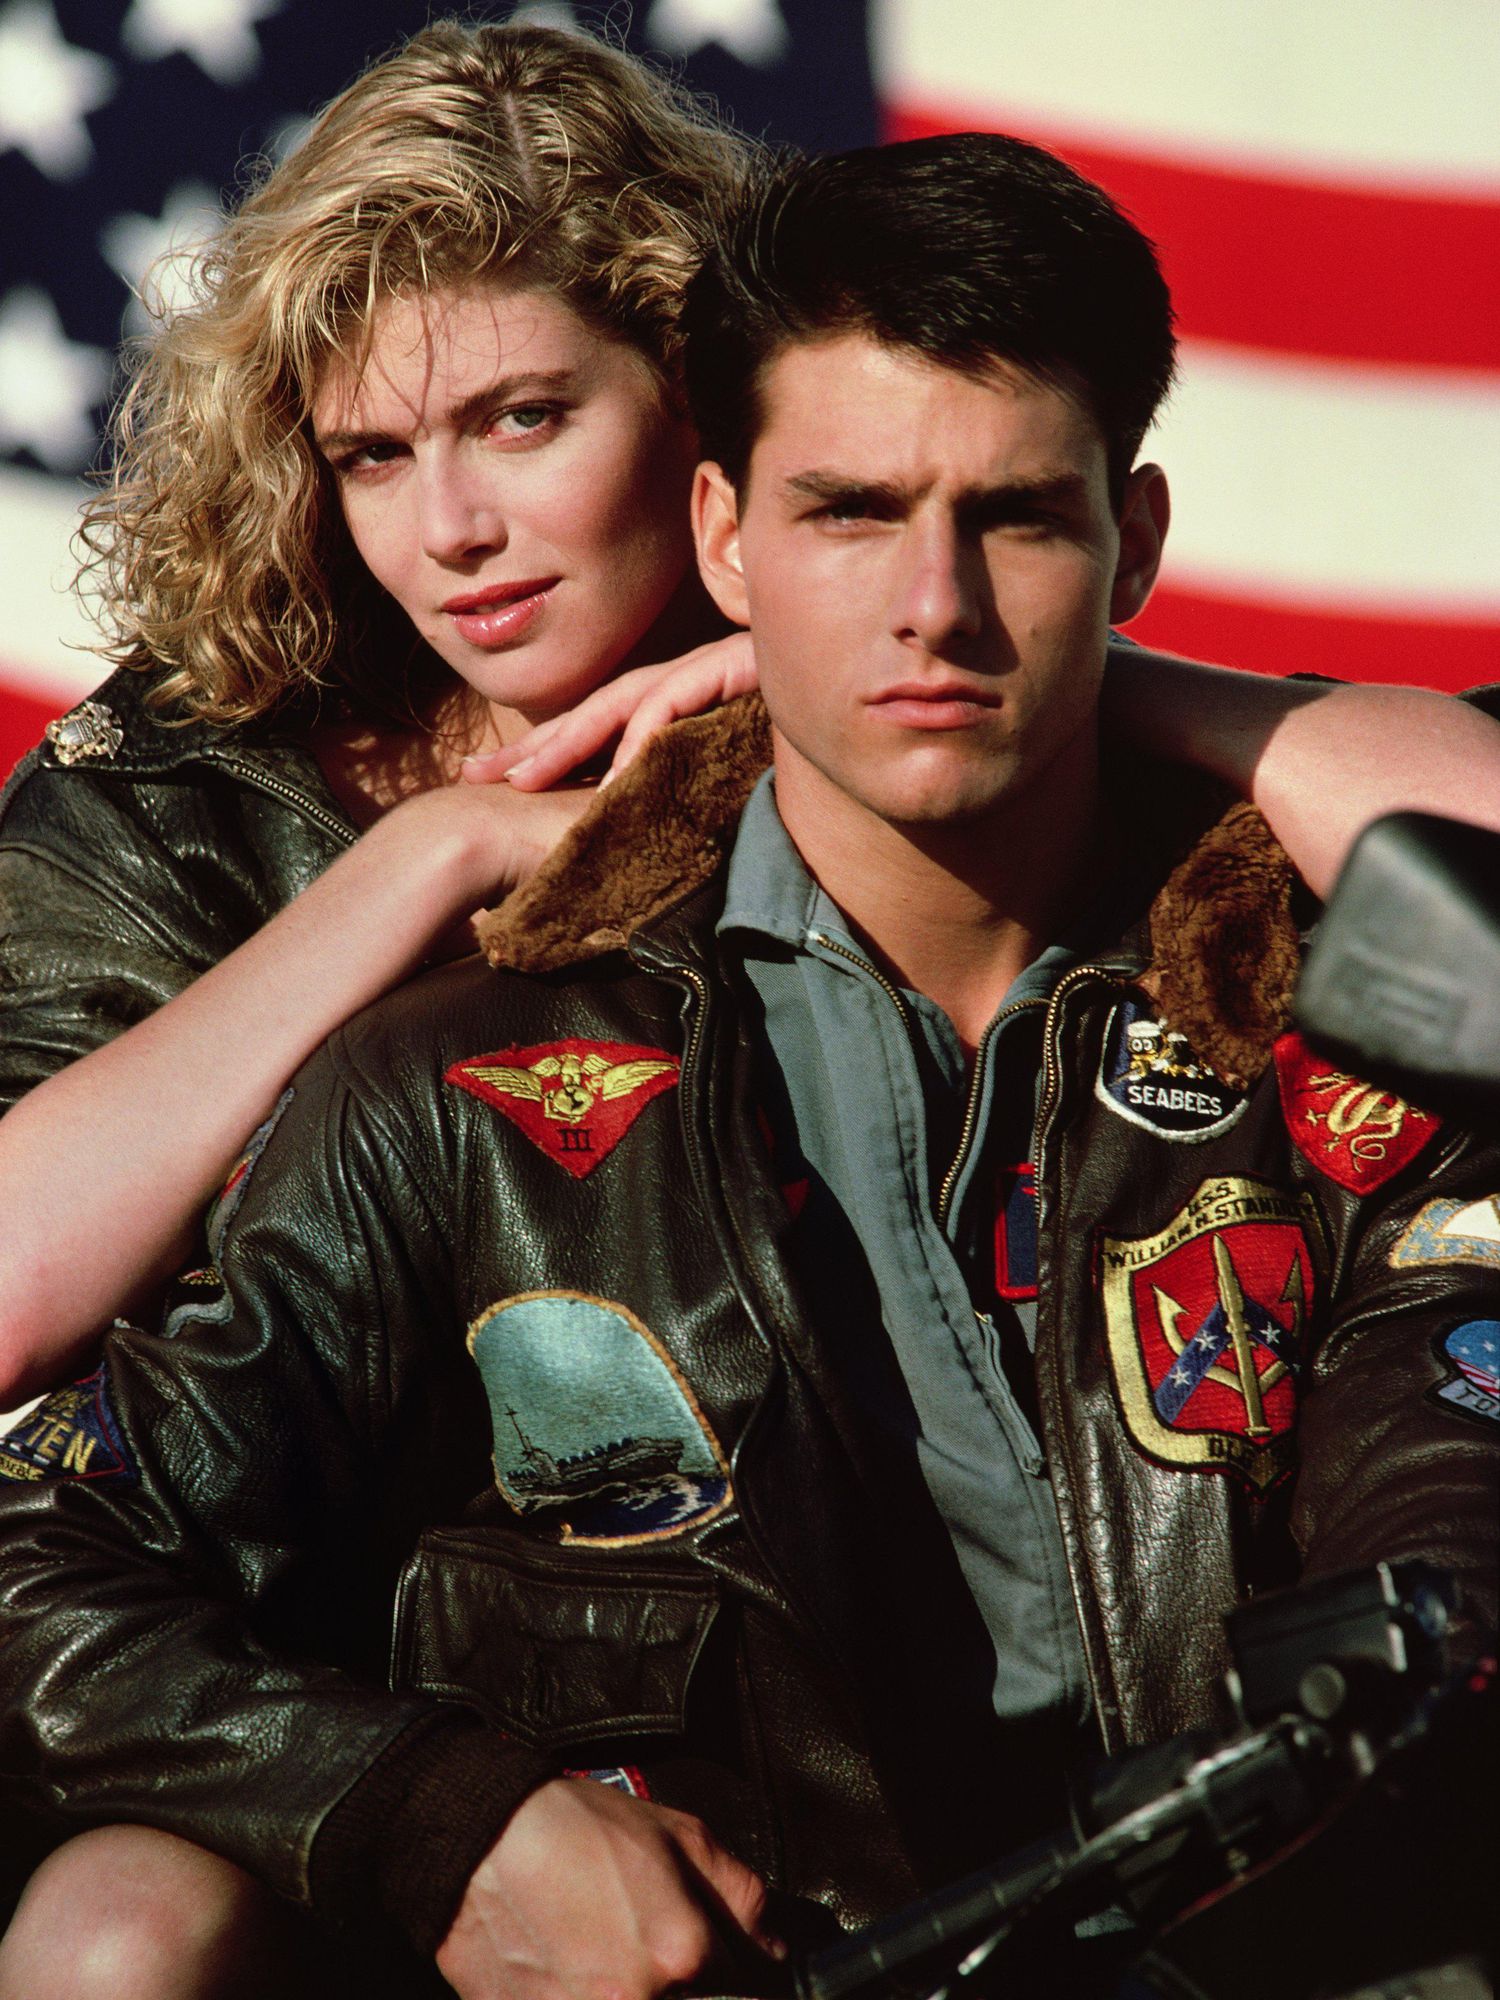 Kelly McGillis and Tom Cruise wear black leather bomber jackets with patches as they sit on a motorcycle in front of an American flag and she rests her hands on his shoulders